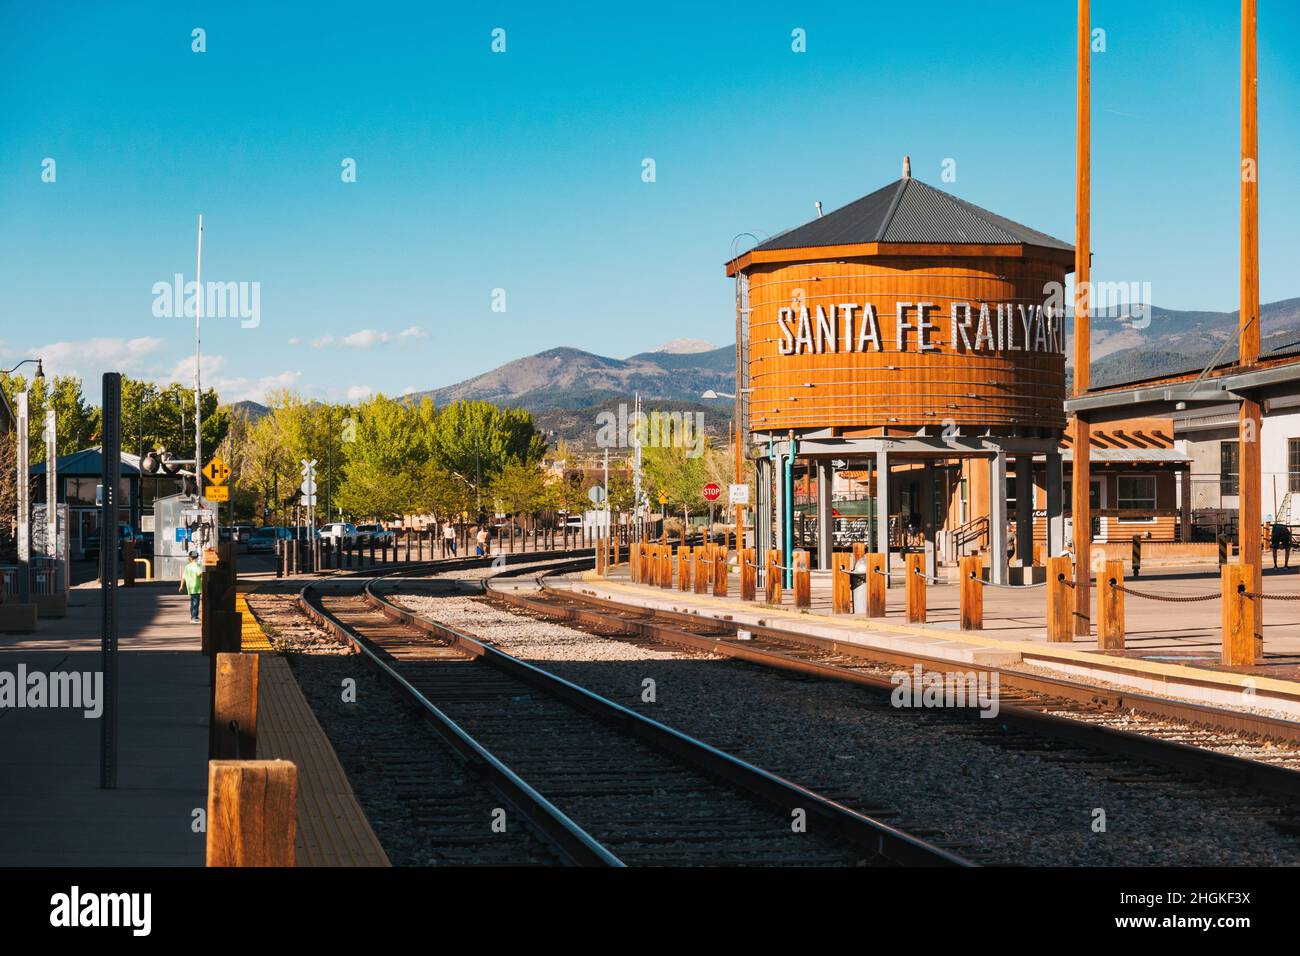 a wooden water tank with the signage 'Santa Fe Railyard' in the city of Santa Fe, New Mexico Stock Photo